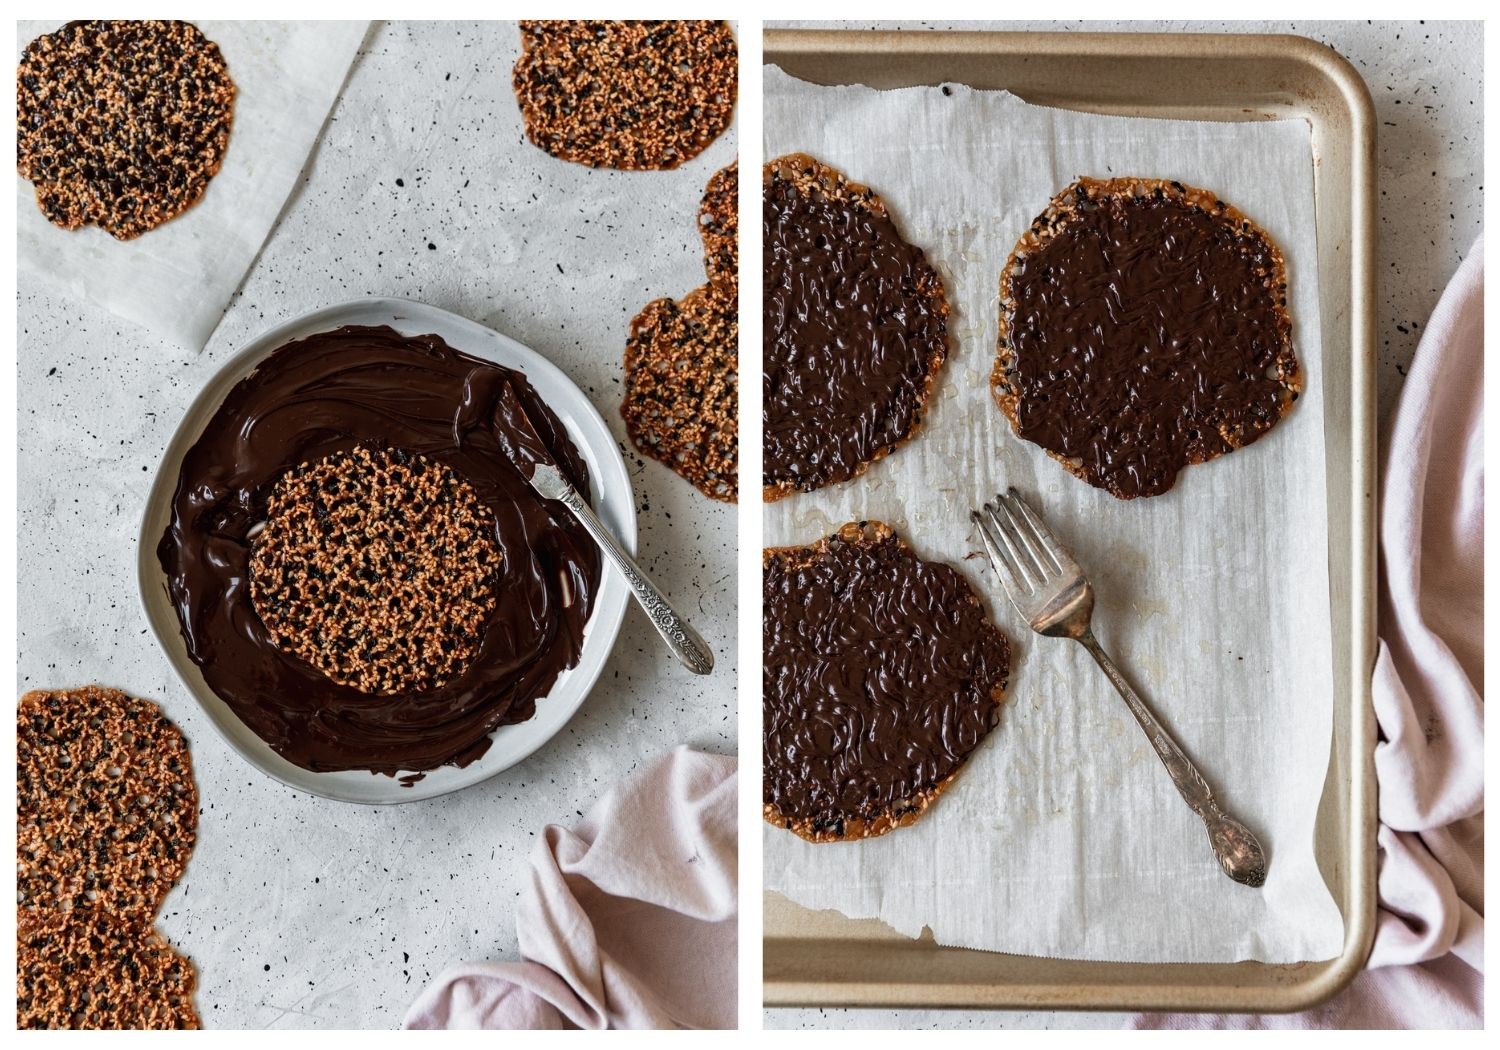 Two overhead images; on the left, cookies are being dipped in melted chocolate. On the right, cookies are being decorated with the tines of a fork.